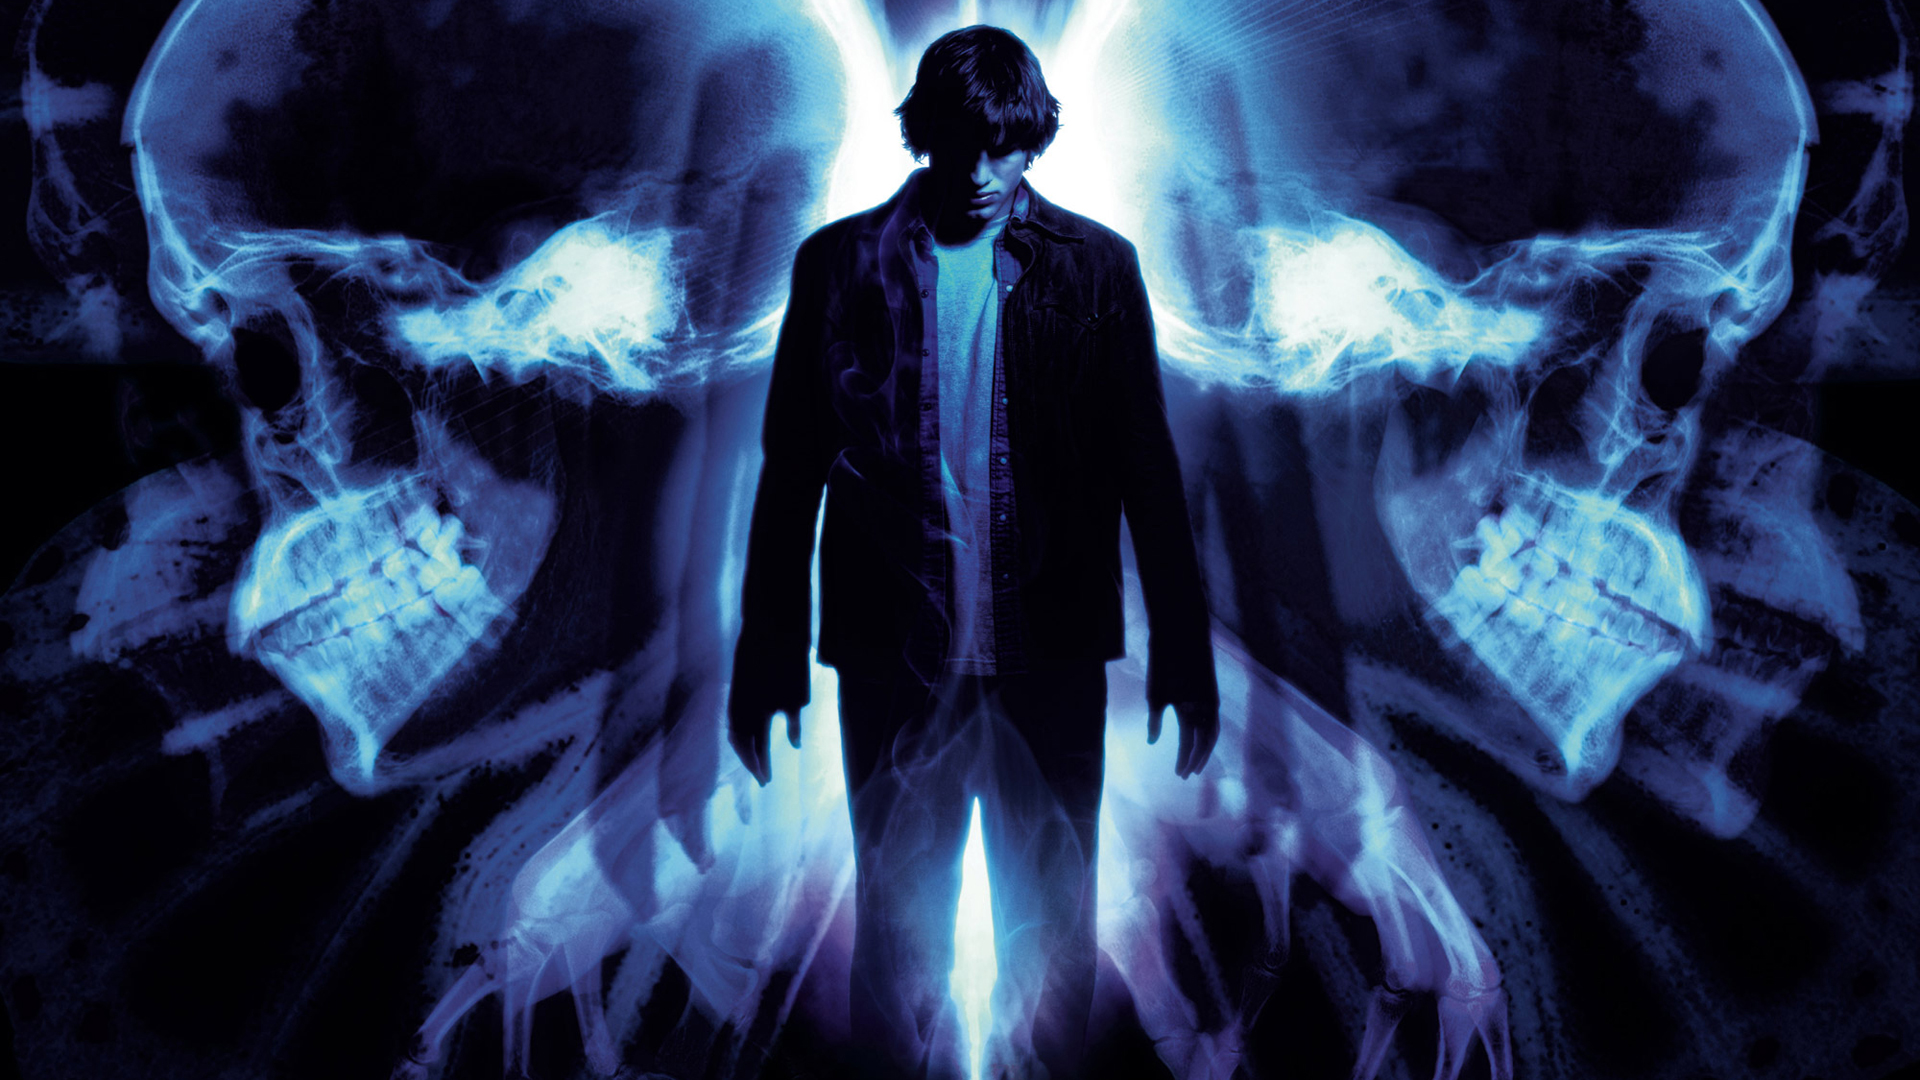 Movie The Butterfly Effect 1920x1080